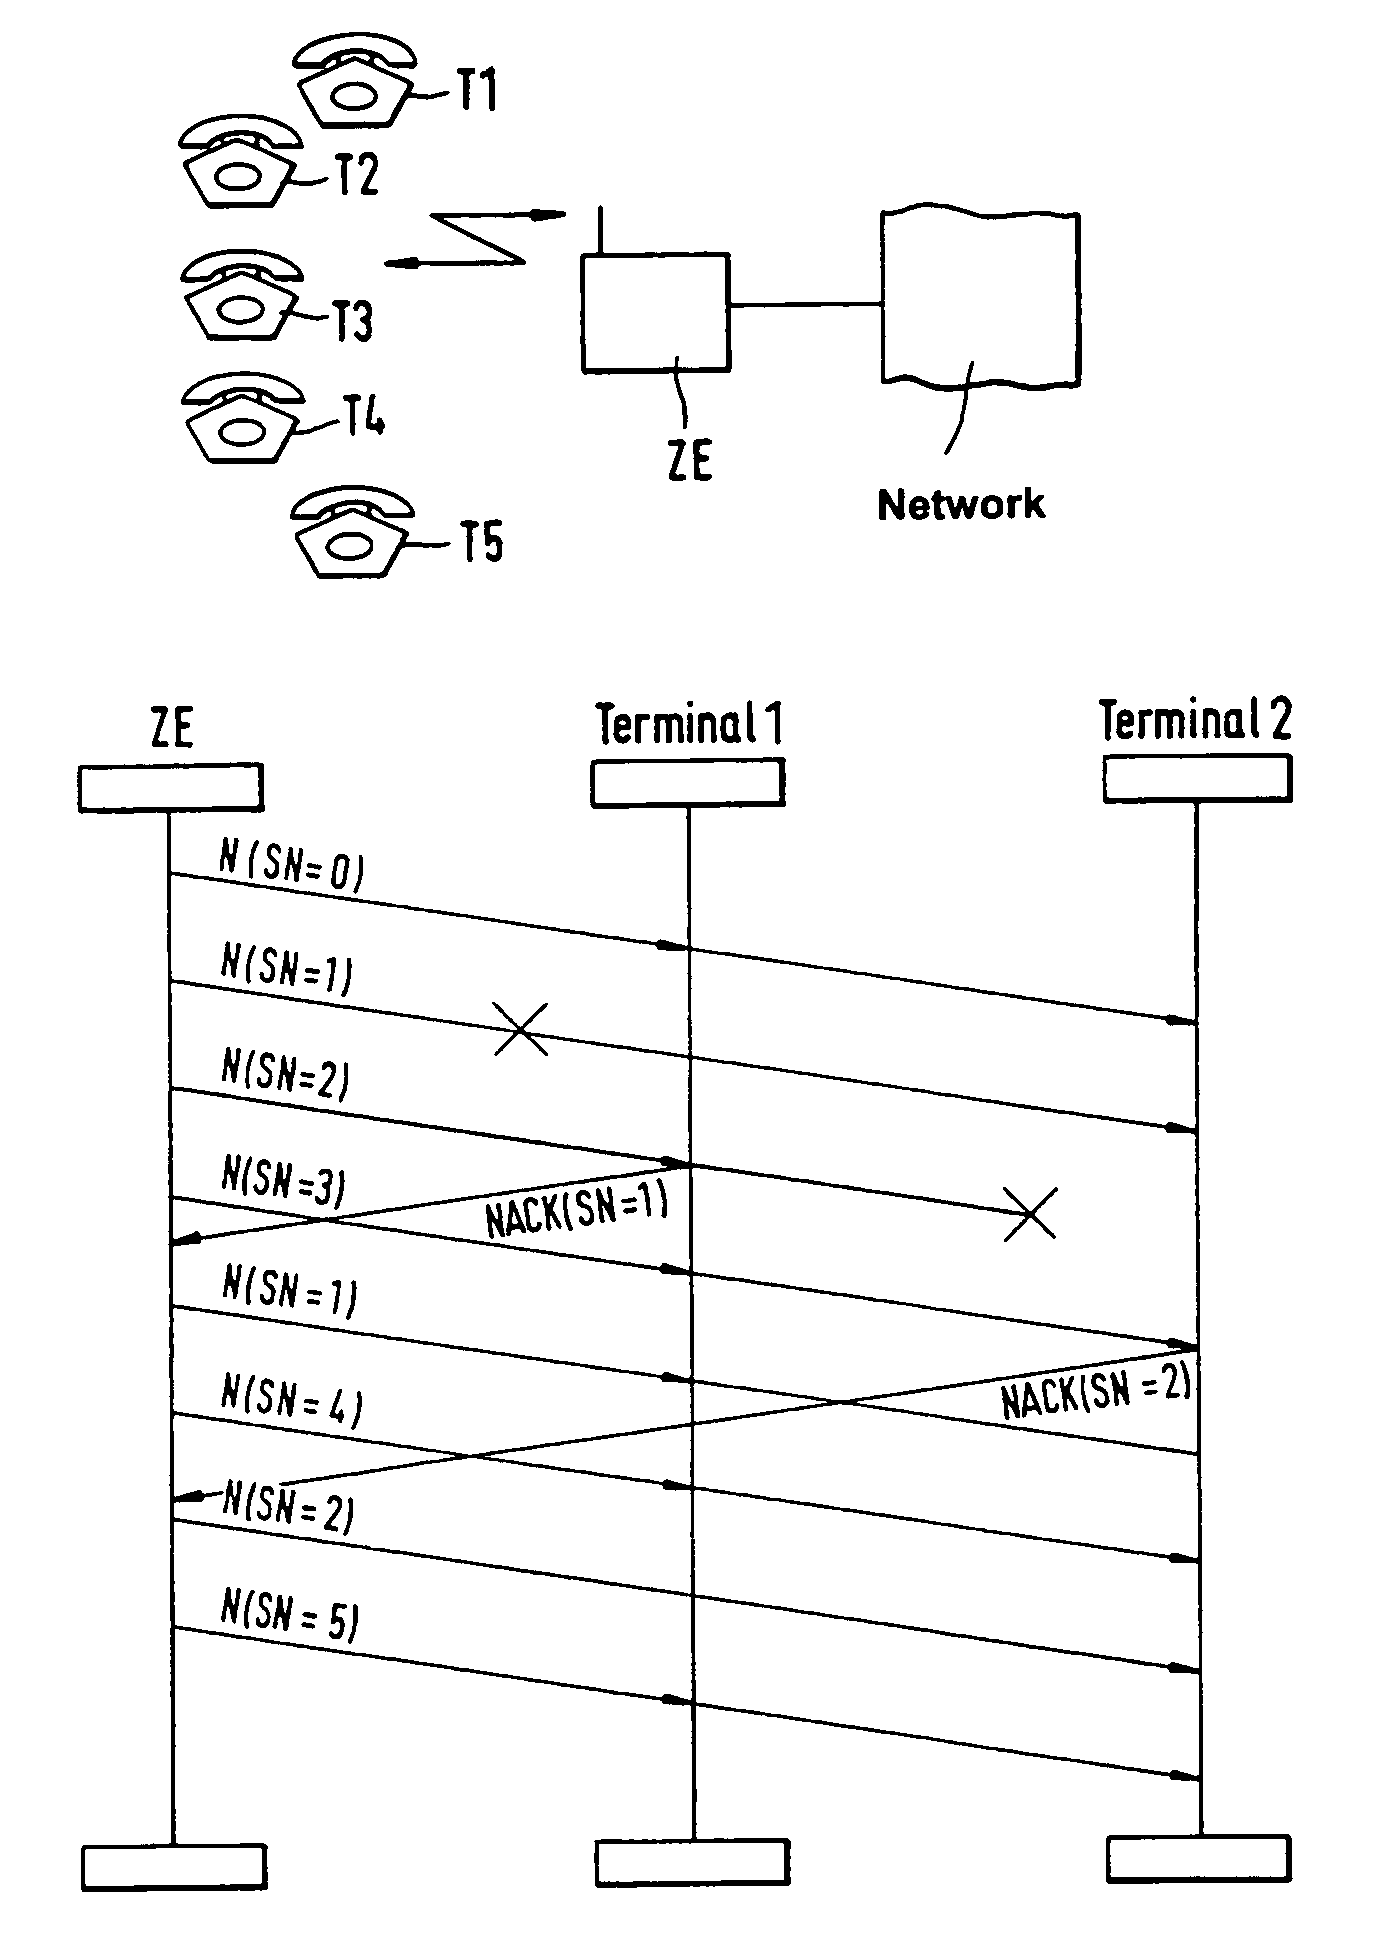 Method of repeat transmission of messages in a centrally controlled communication network